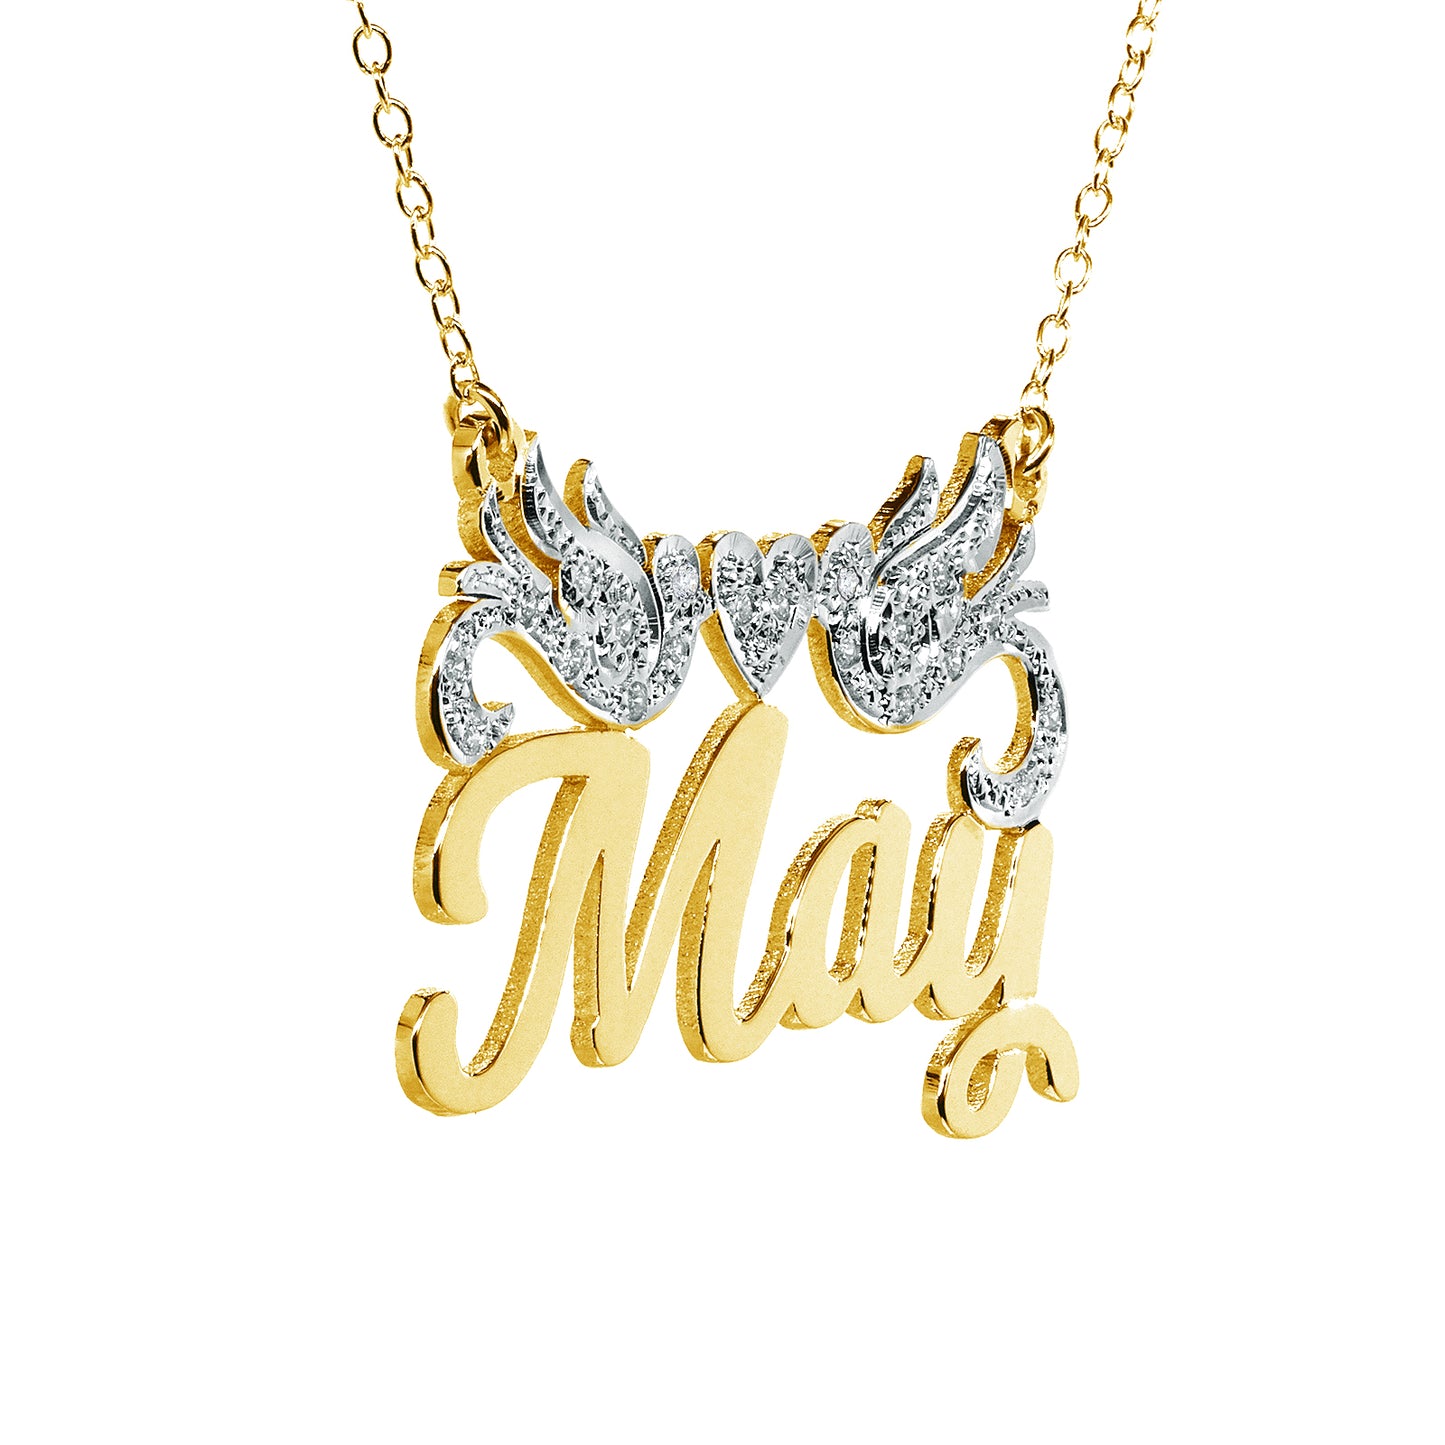 Custom Nameplate with Doves and Heart in 14K Gold and Diamonds Necklace